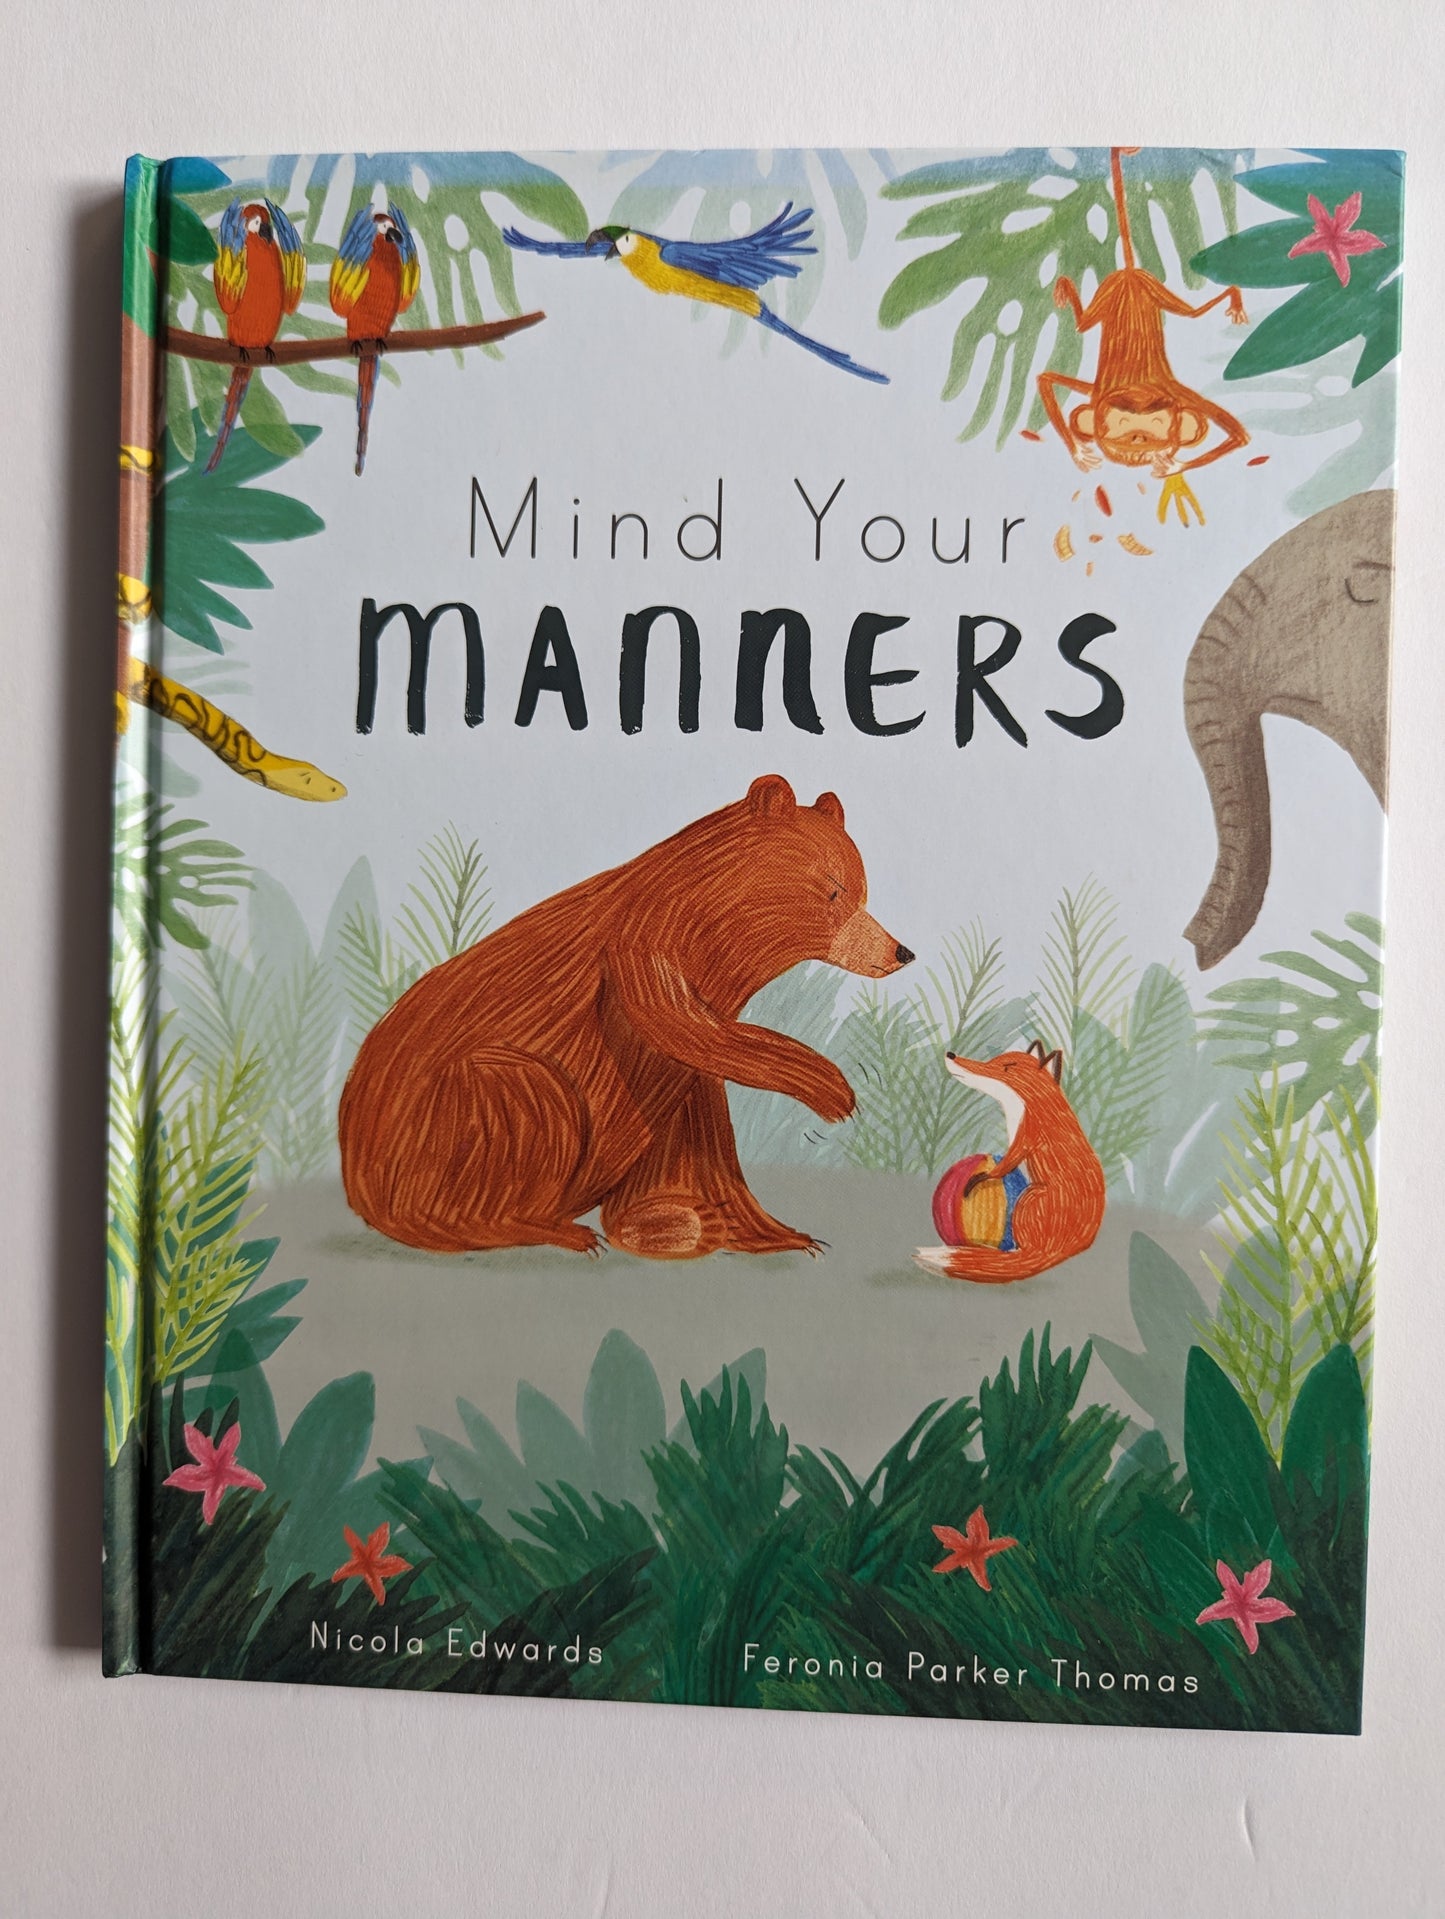 Mind Your Manners- A Kane Miller Book